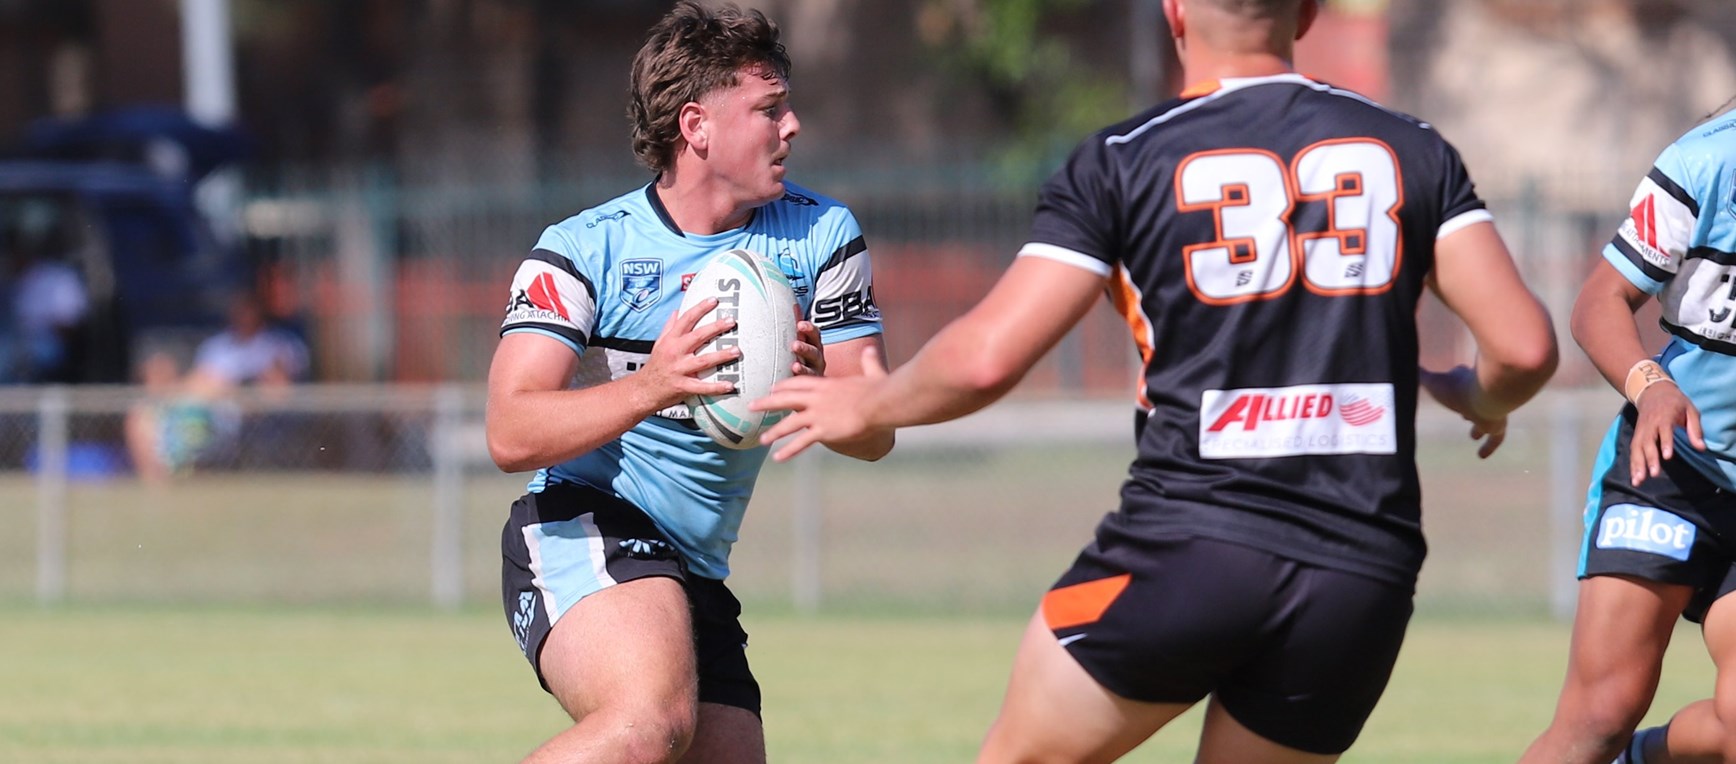 Gallery: Junior Sharks take on Wests